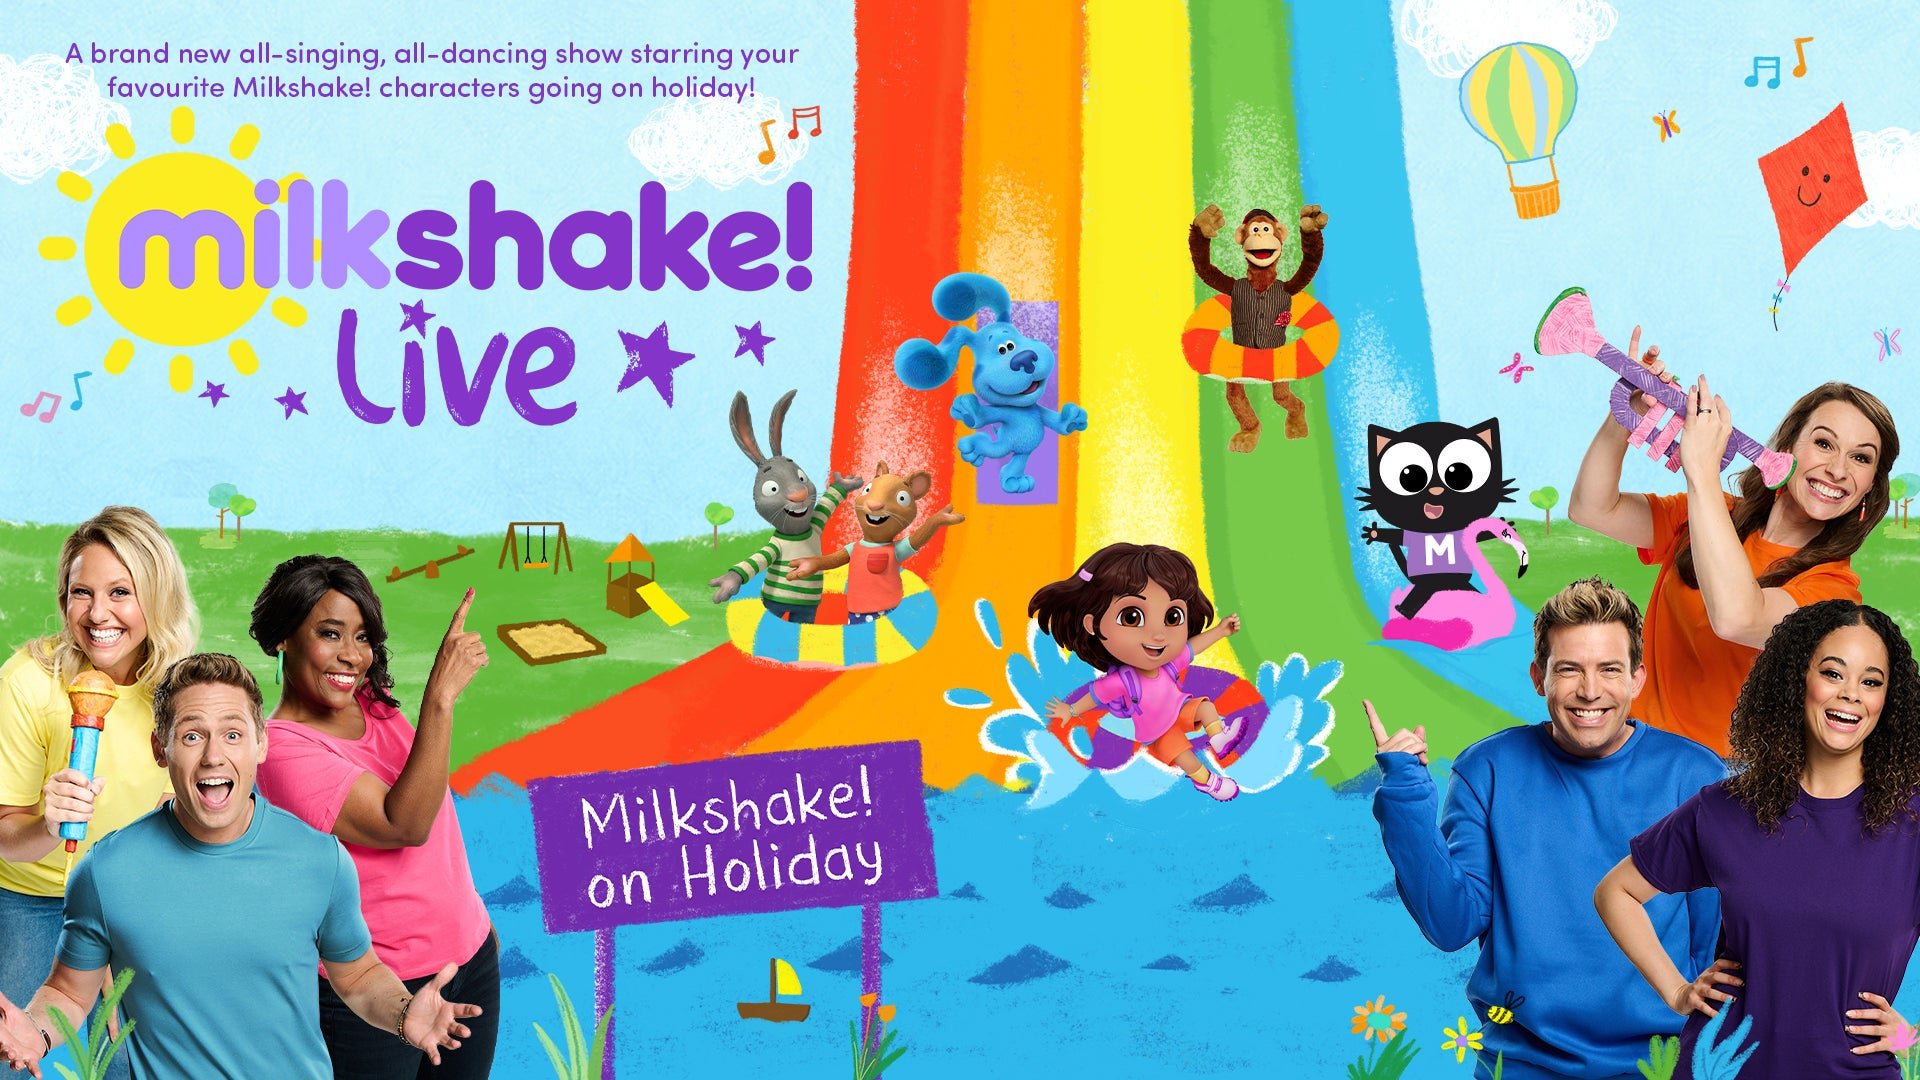 Image name Milkshake Live on Holiday at Scarborough Spa Theatre Scarborough the 6 image from the post Milkshake! Live on Holiday at Scarborough Spa Grand Hall, Scarborough in Yorkshire.com.